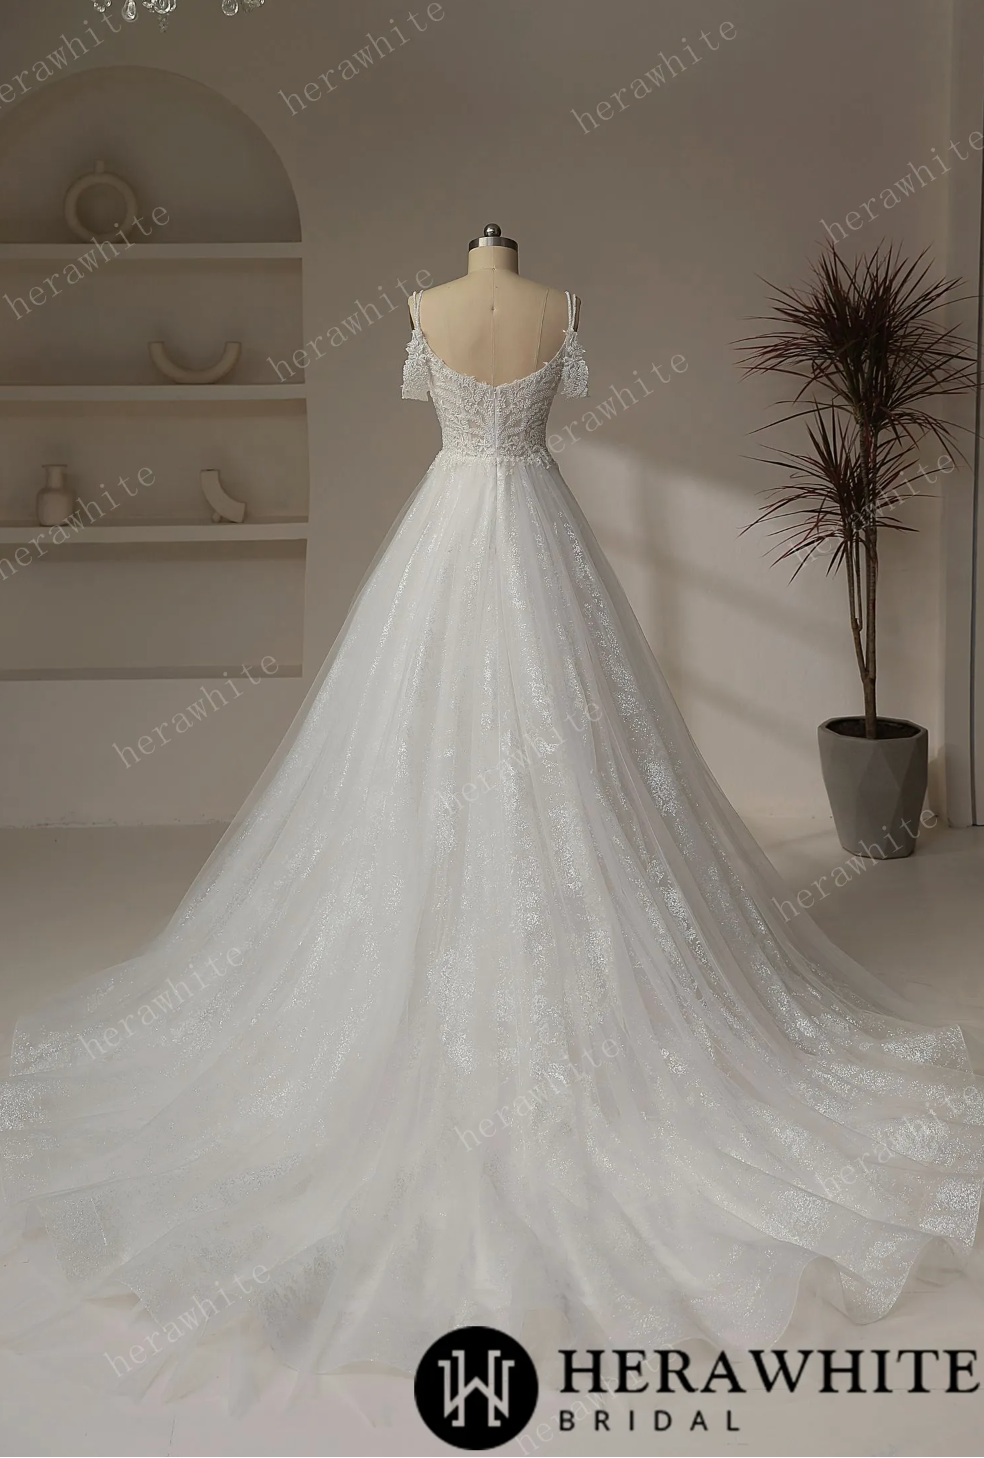 Beaded leaf lace Illusion Bodice With V-neckline Wedding Gown